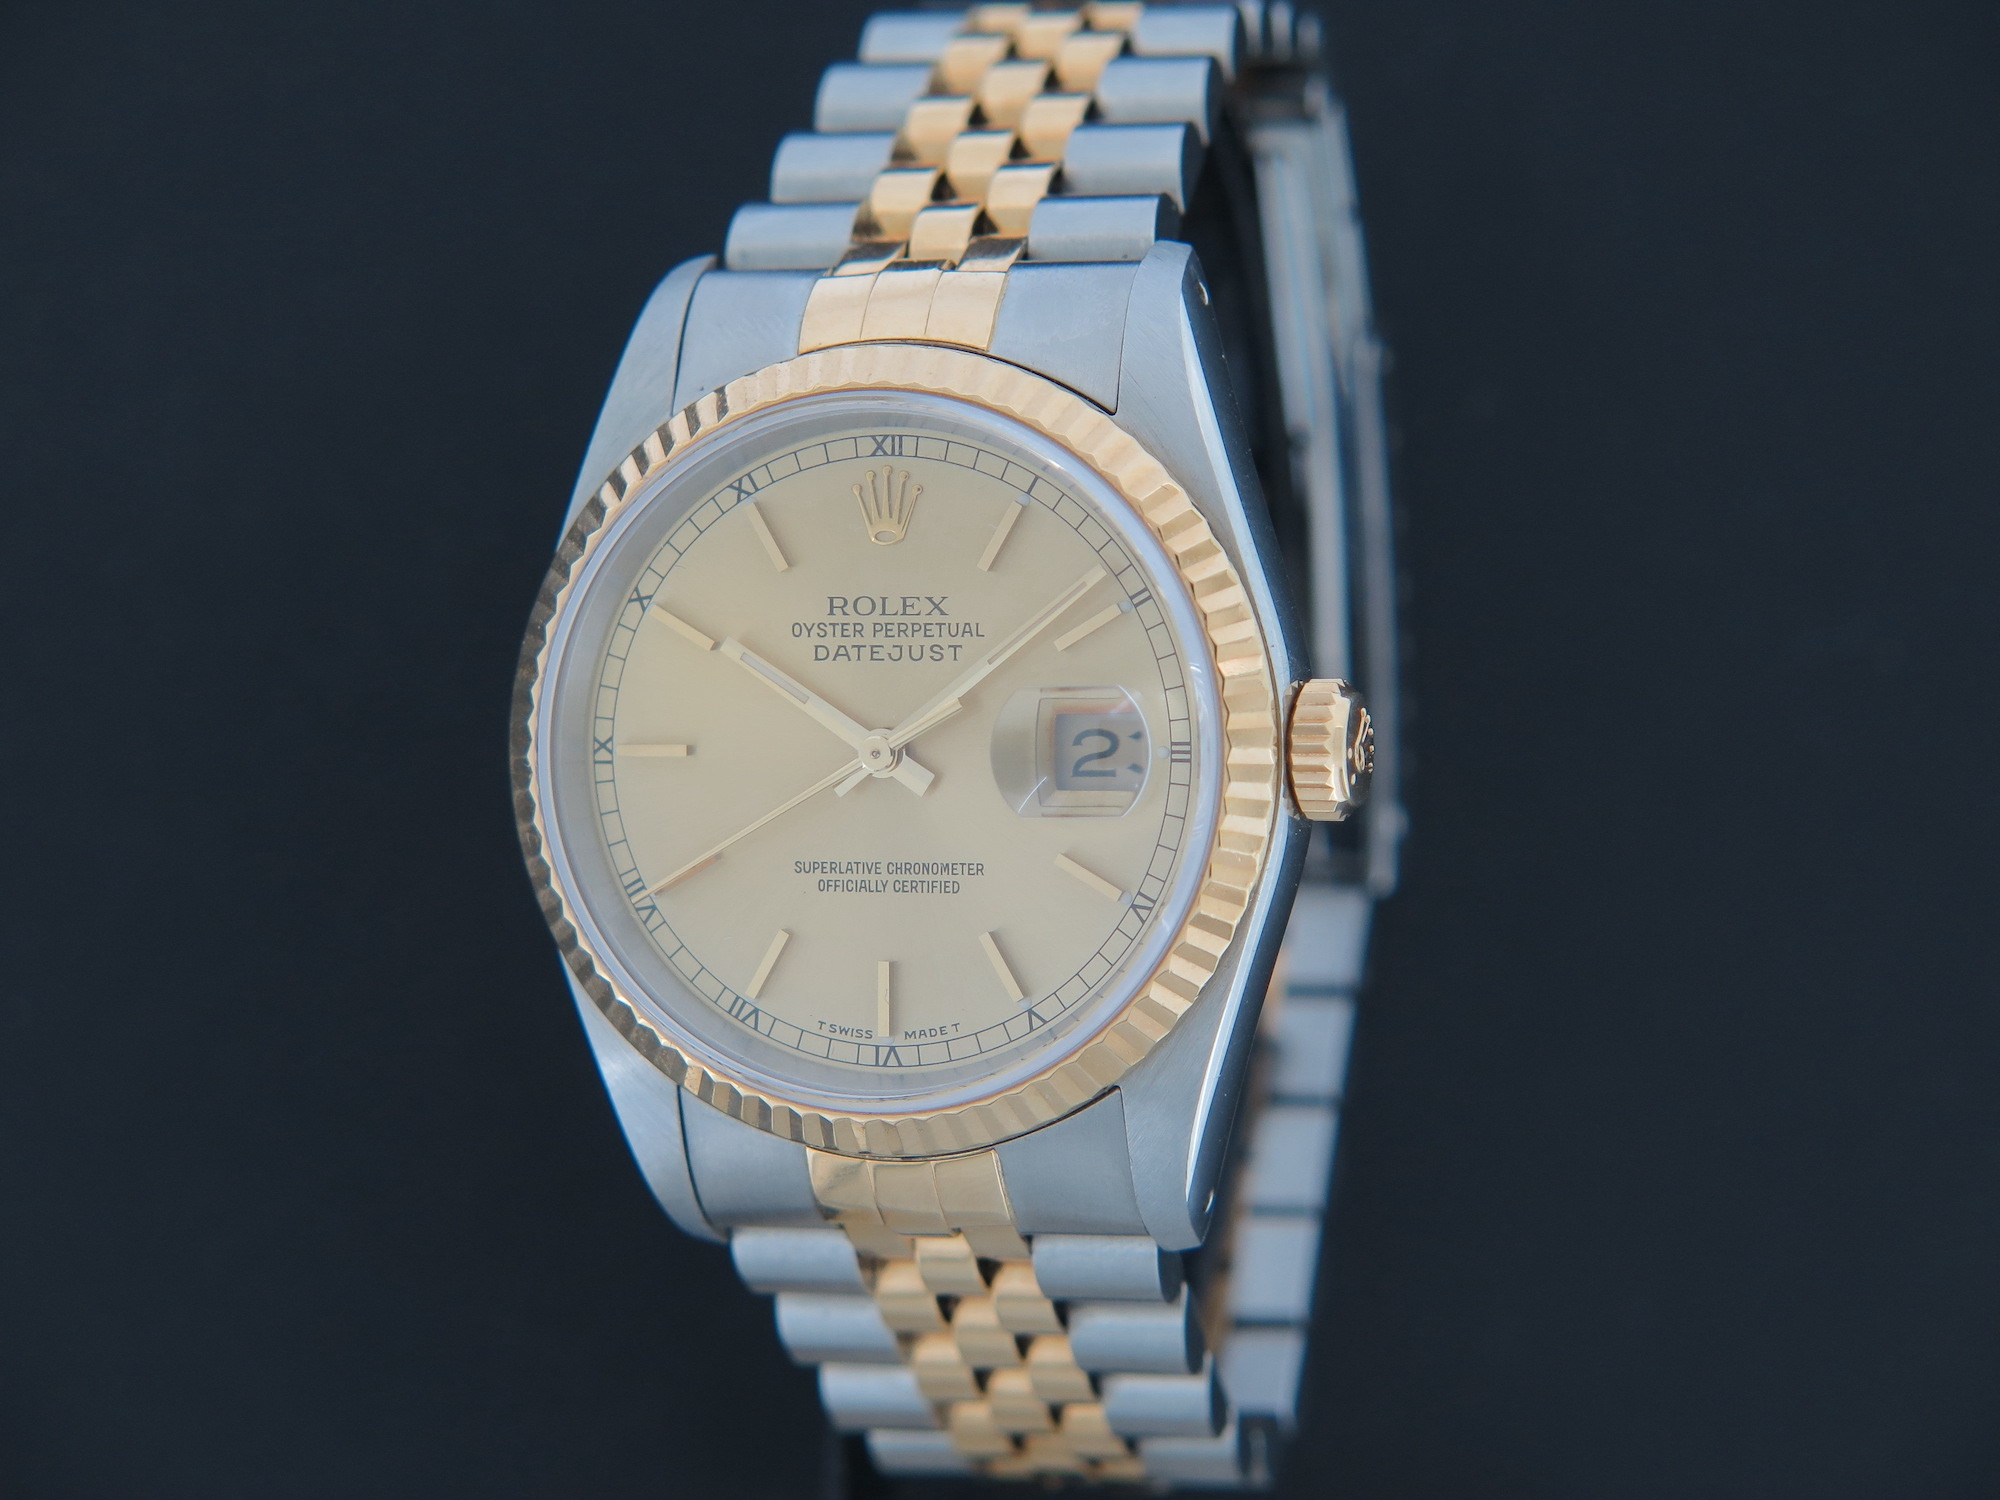 Rolex Datejust Gold/Steel Champagne Dial 16233